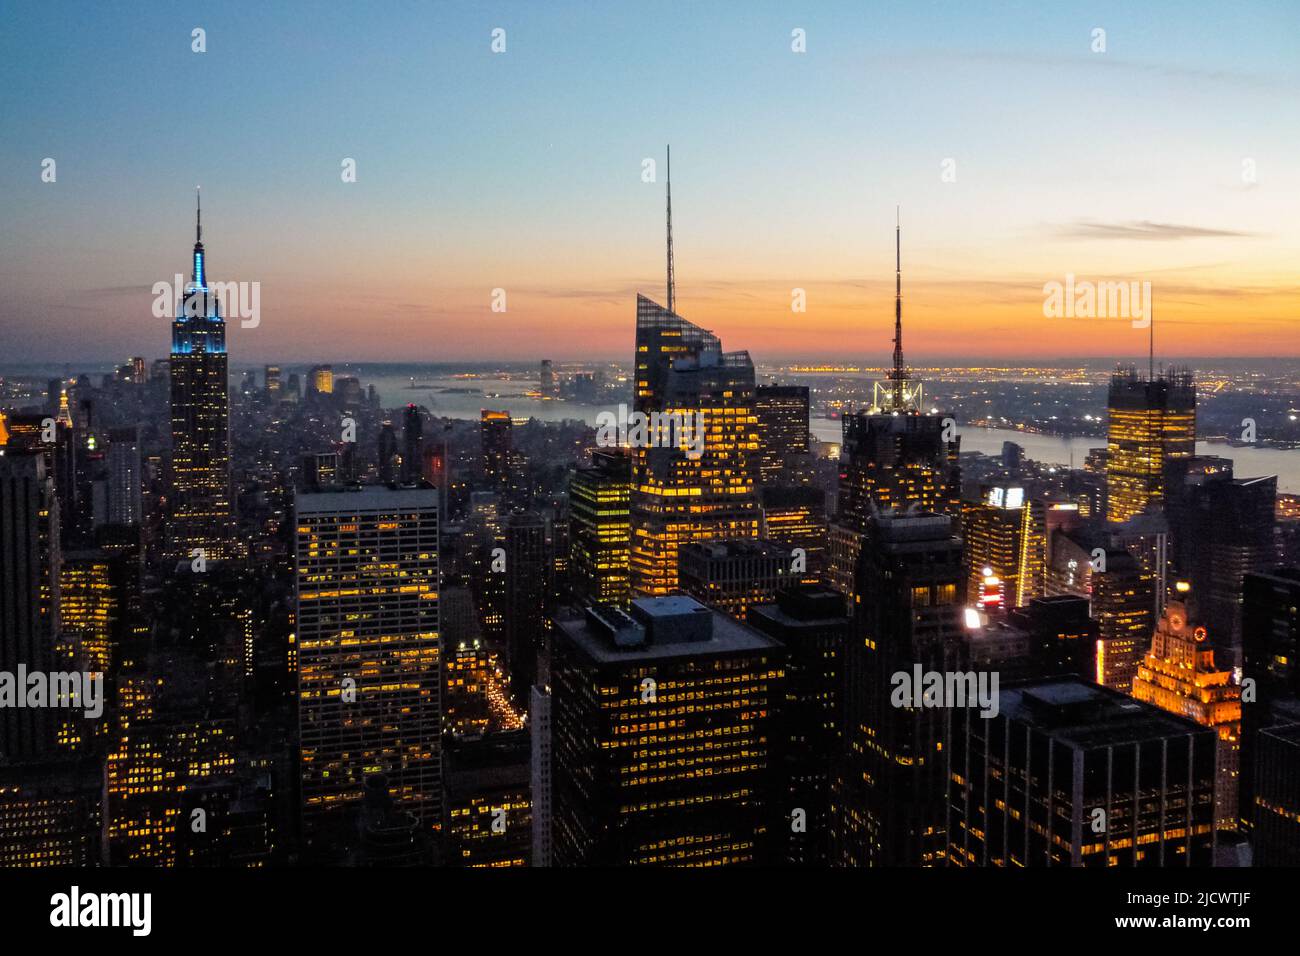 View of Manhattan skyline at sunset from Top of The Rock observation deck, New York, United Staes Stock Photo